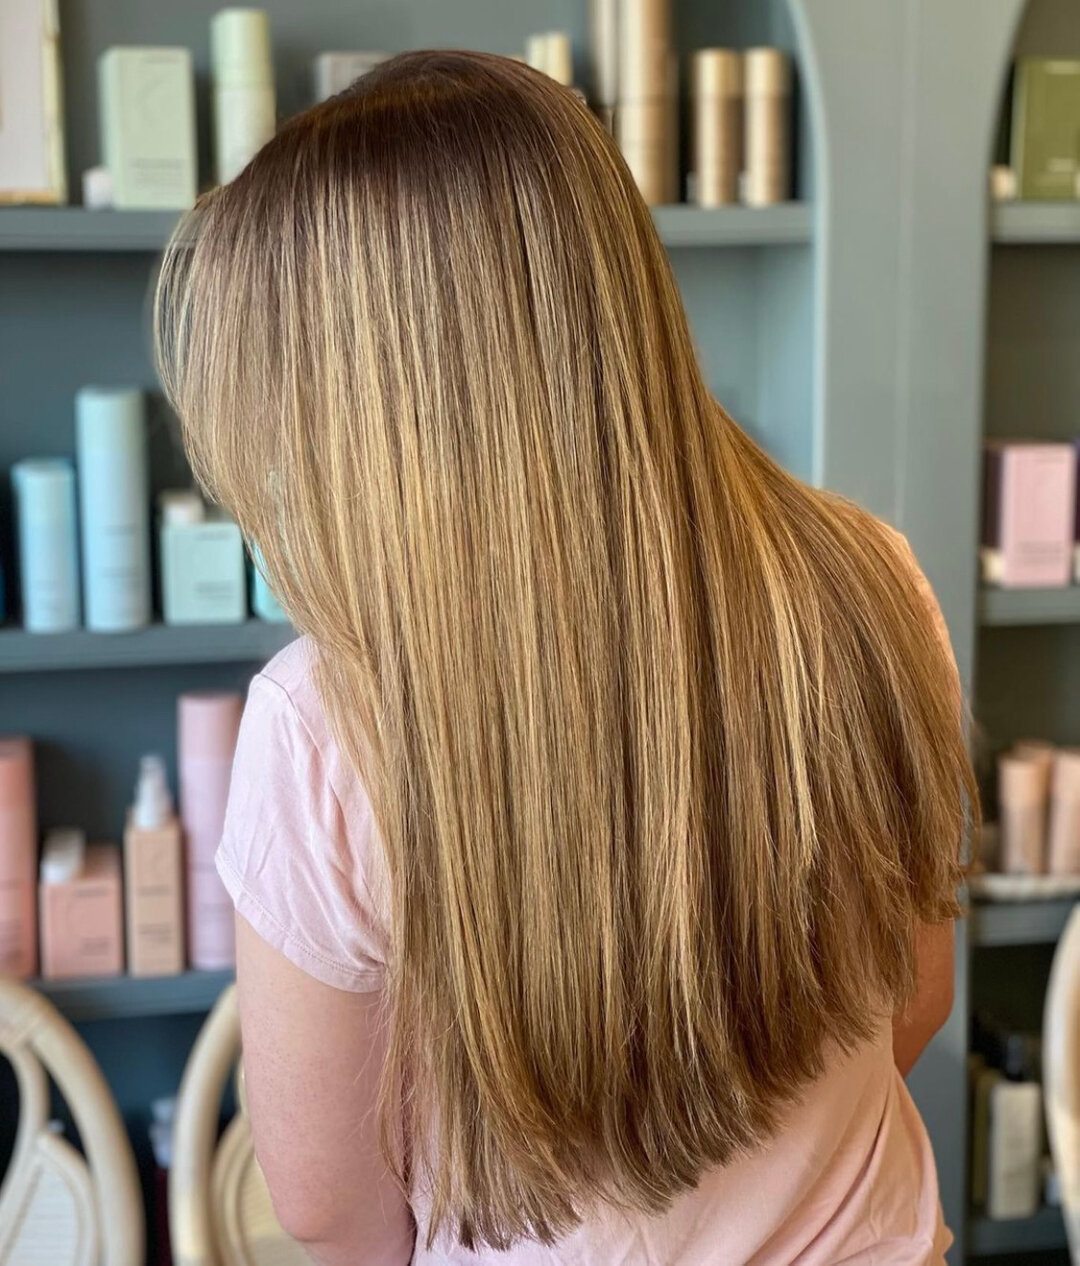 Beautiful and blended💫​​​​​​​​
​​​​​​​​
This beauty came in for a full foil with a root melt, and look at this STUNNING result 🙌🏻 Adding a root melt, smudge, or a shadow root to your full/partial foil allows for a softer grow-out, all while keepin